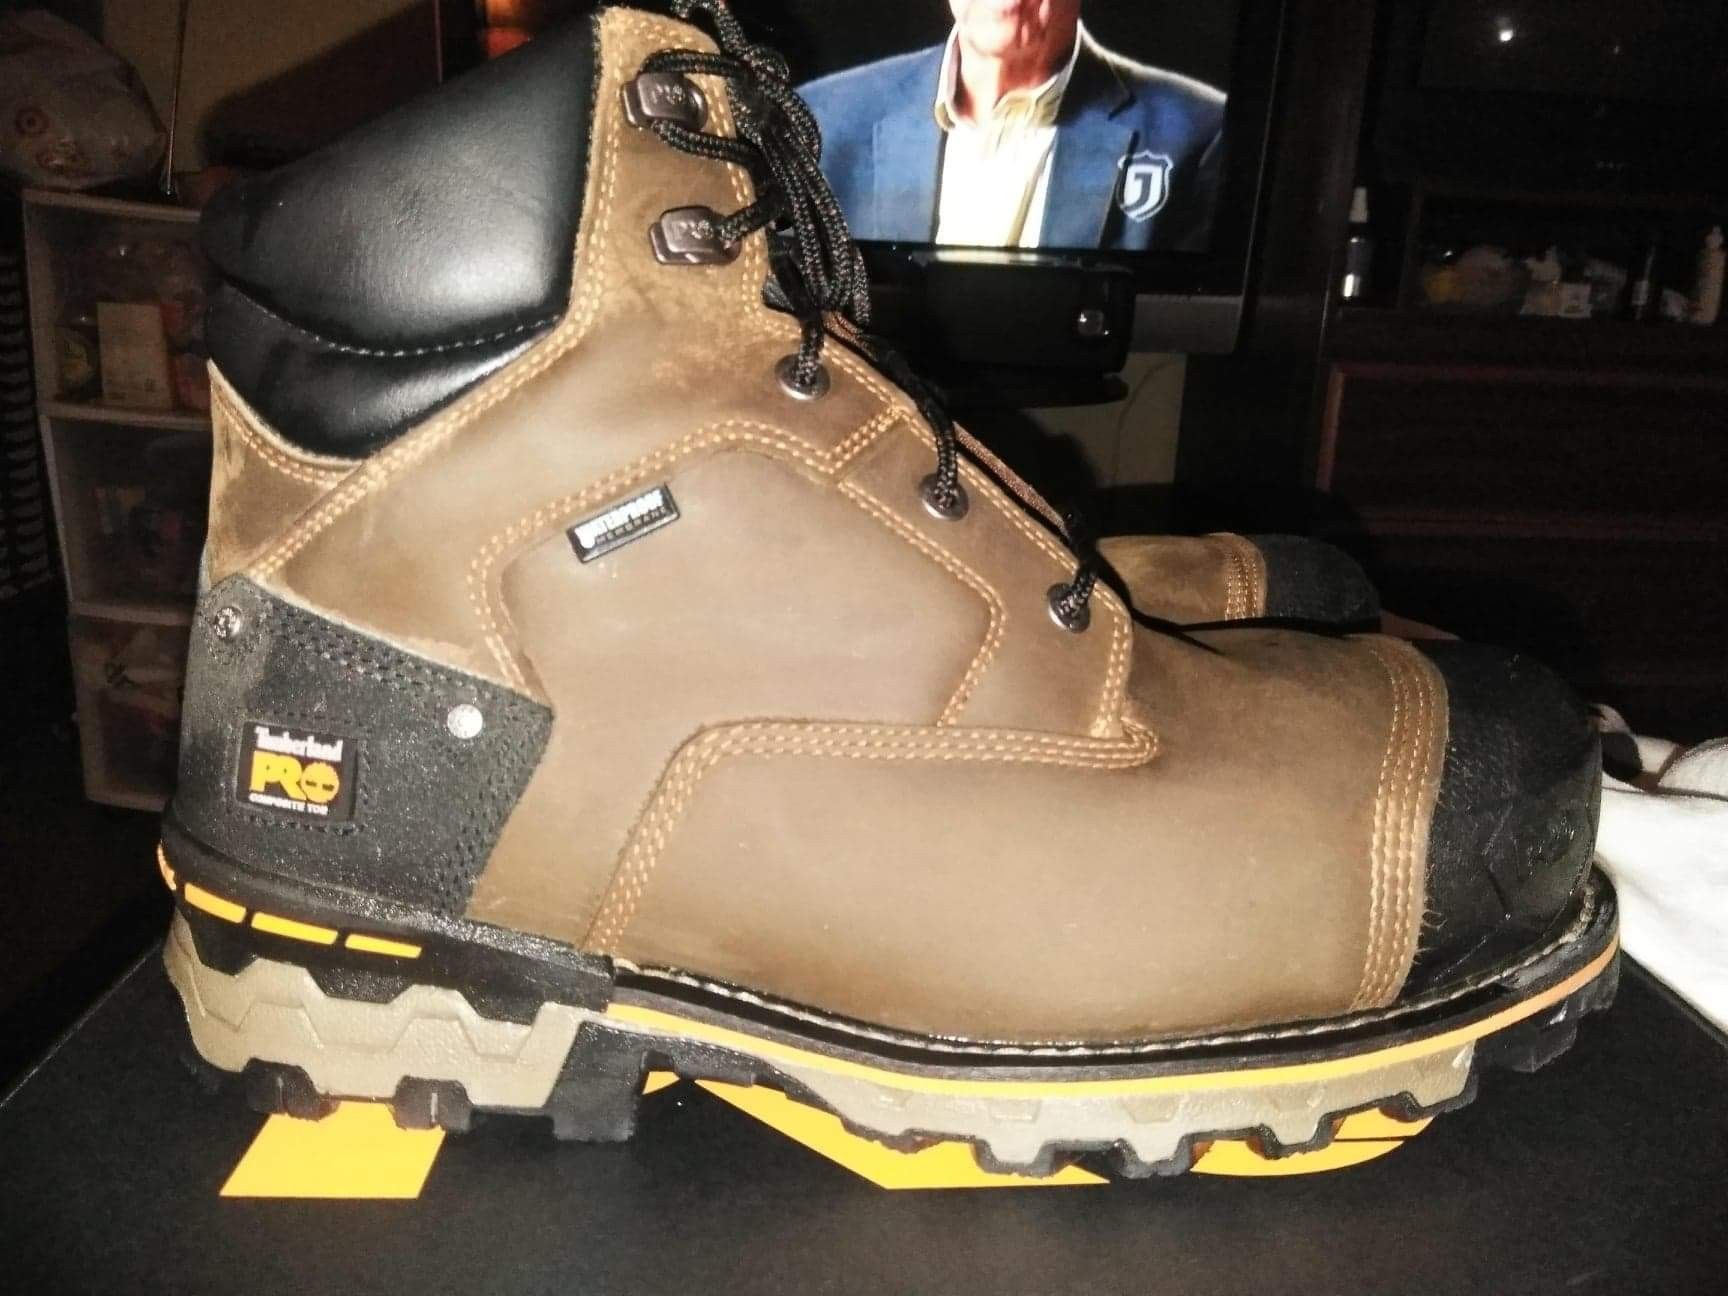 New Timberlands Boondocks work boots for men composite safety waterproof size 10 $125